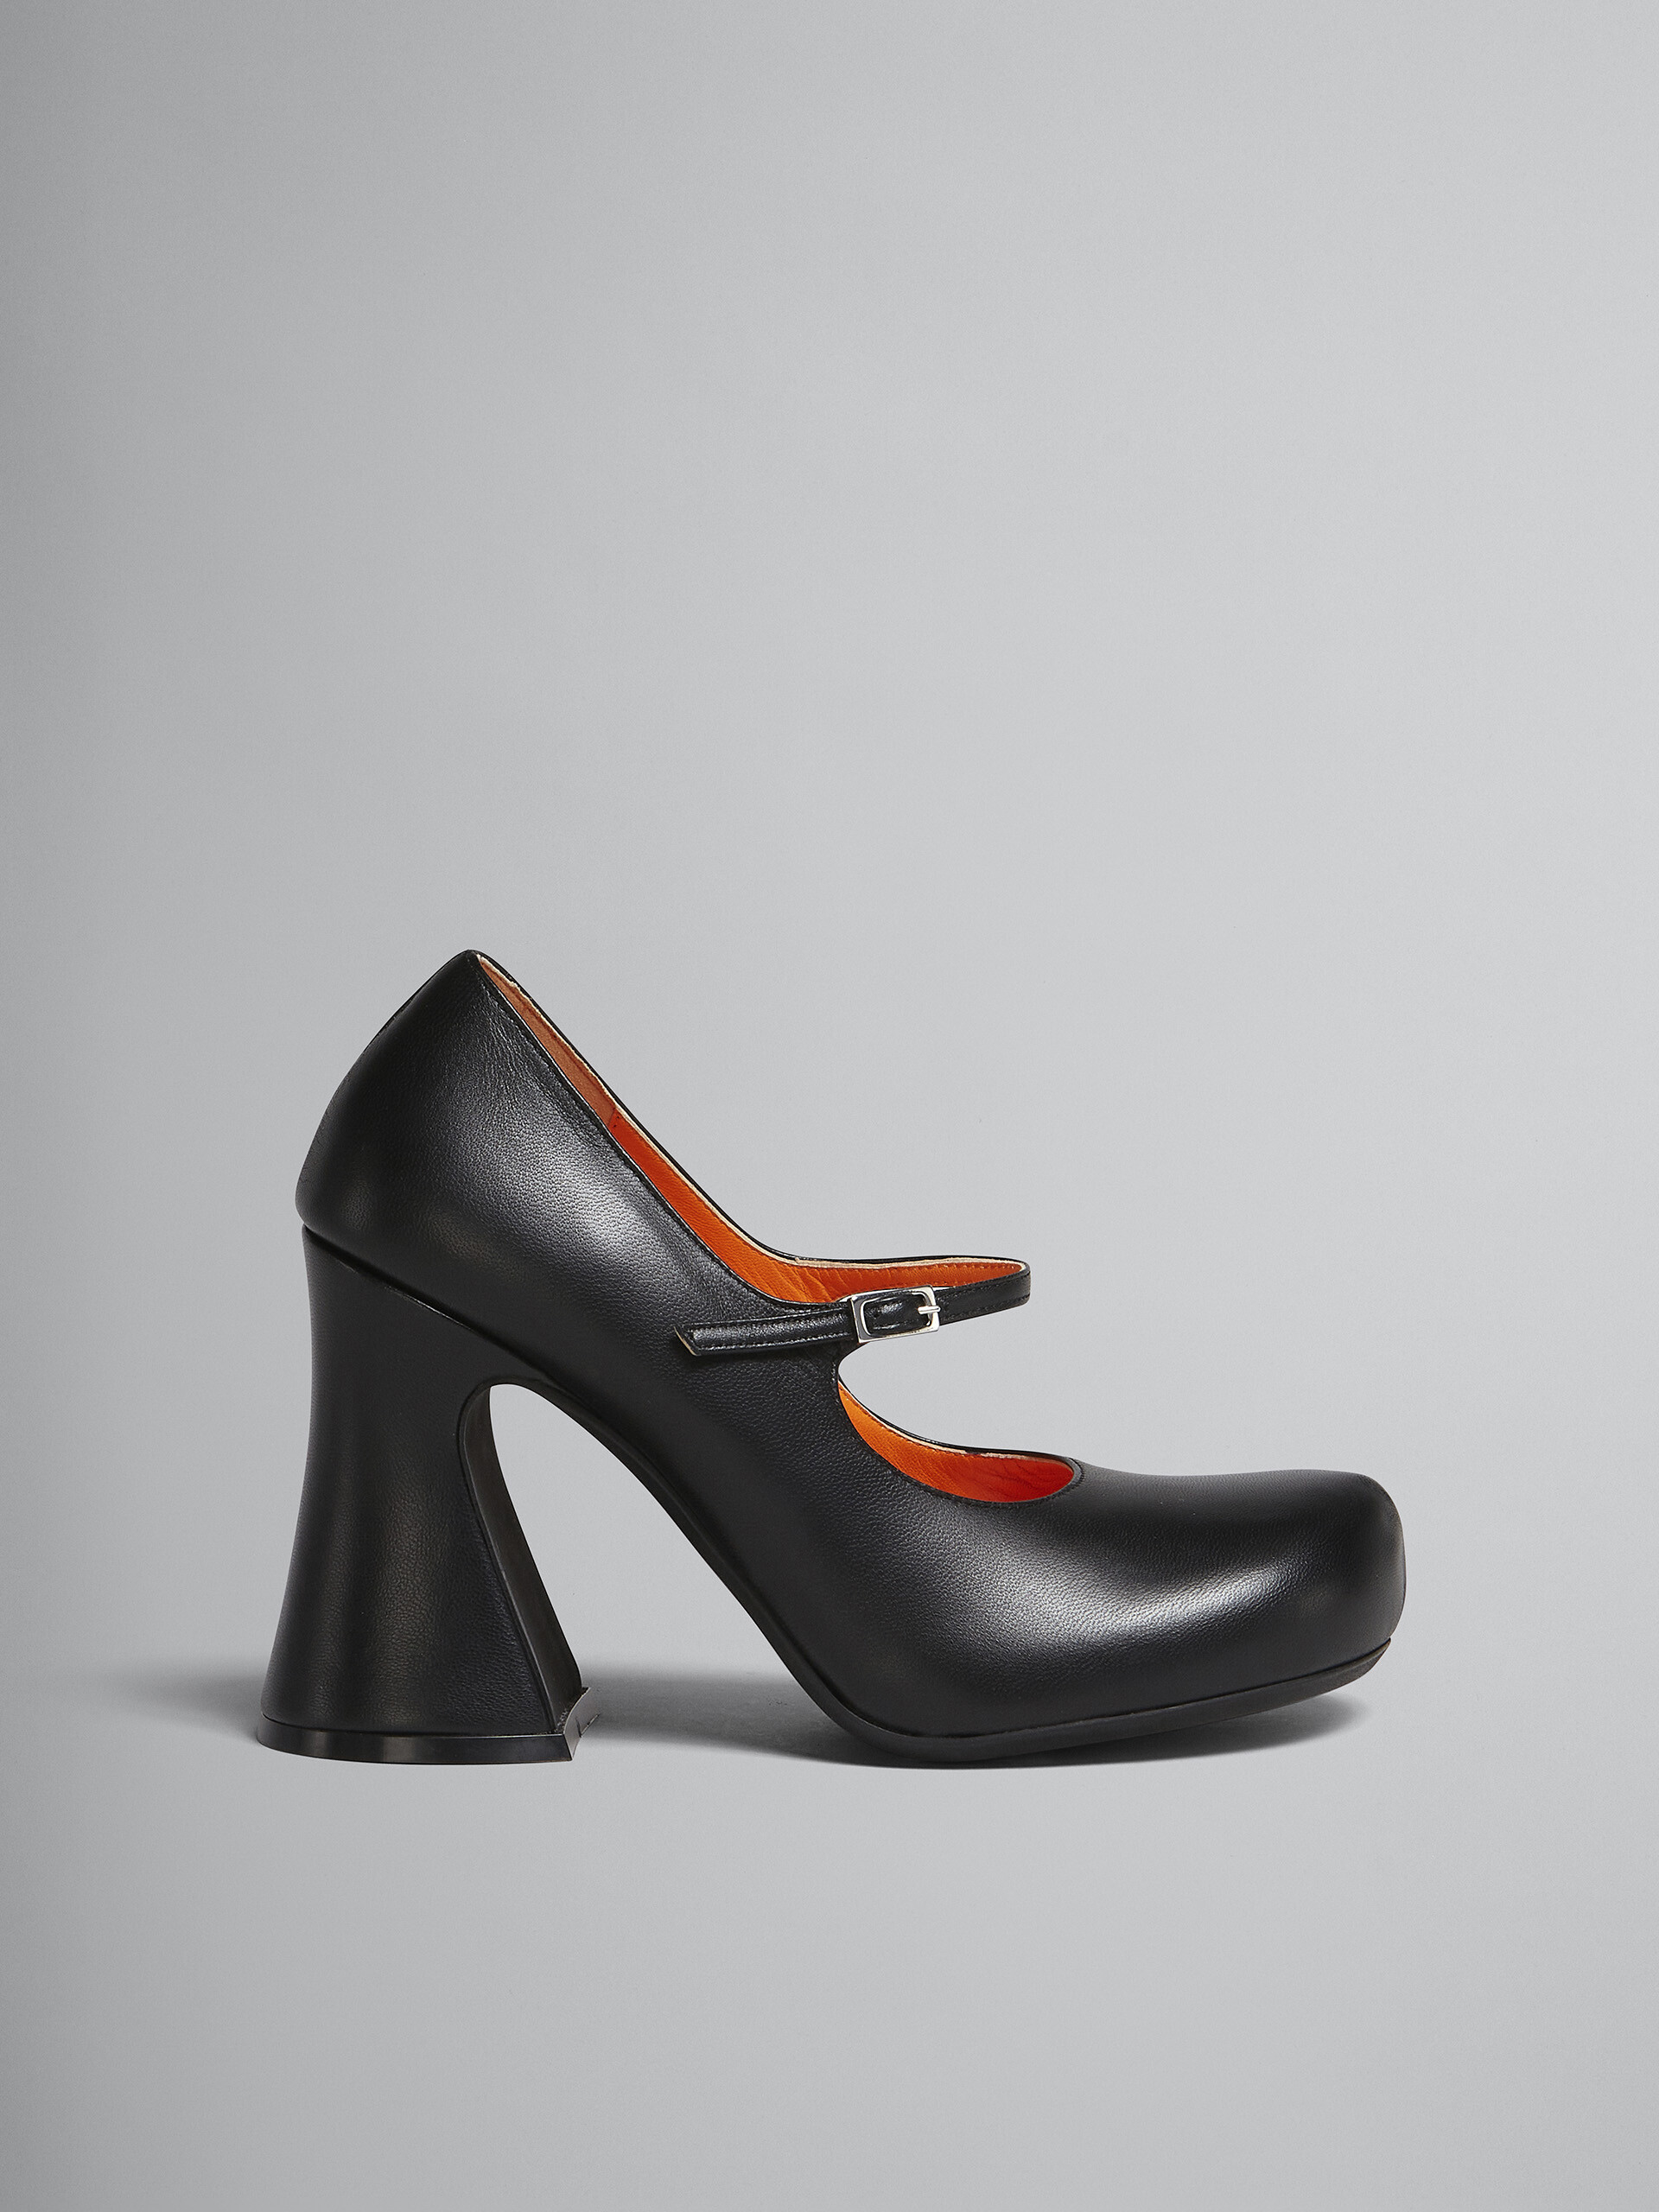 Black leather Mary Jane pump - Sneakers - Image 1